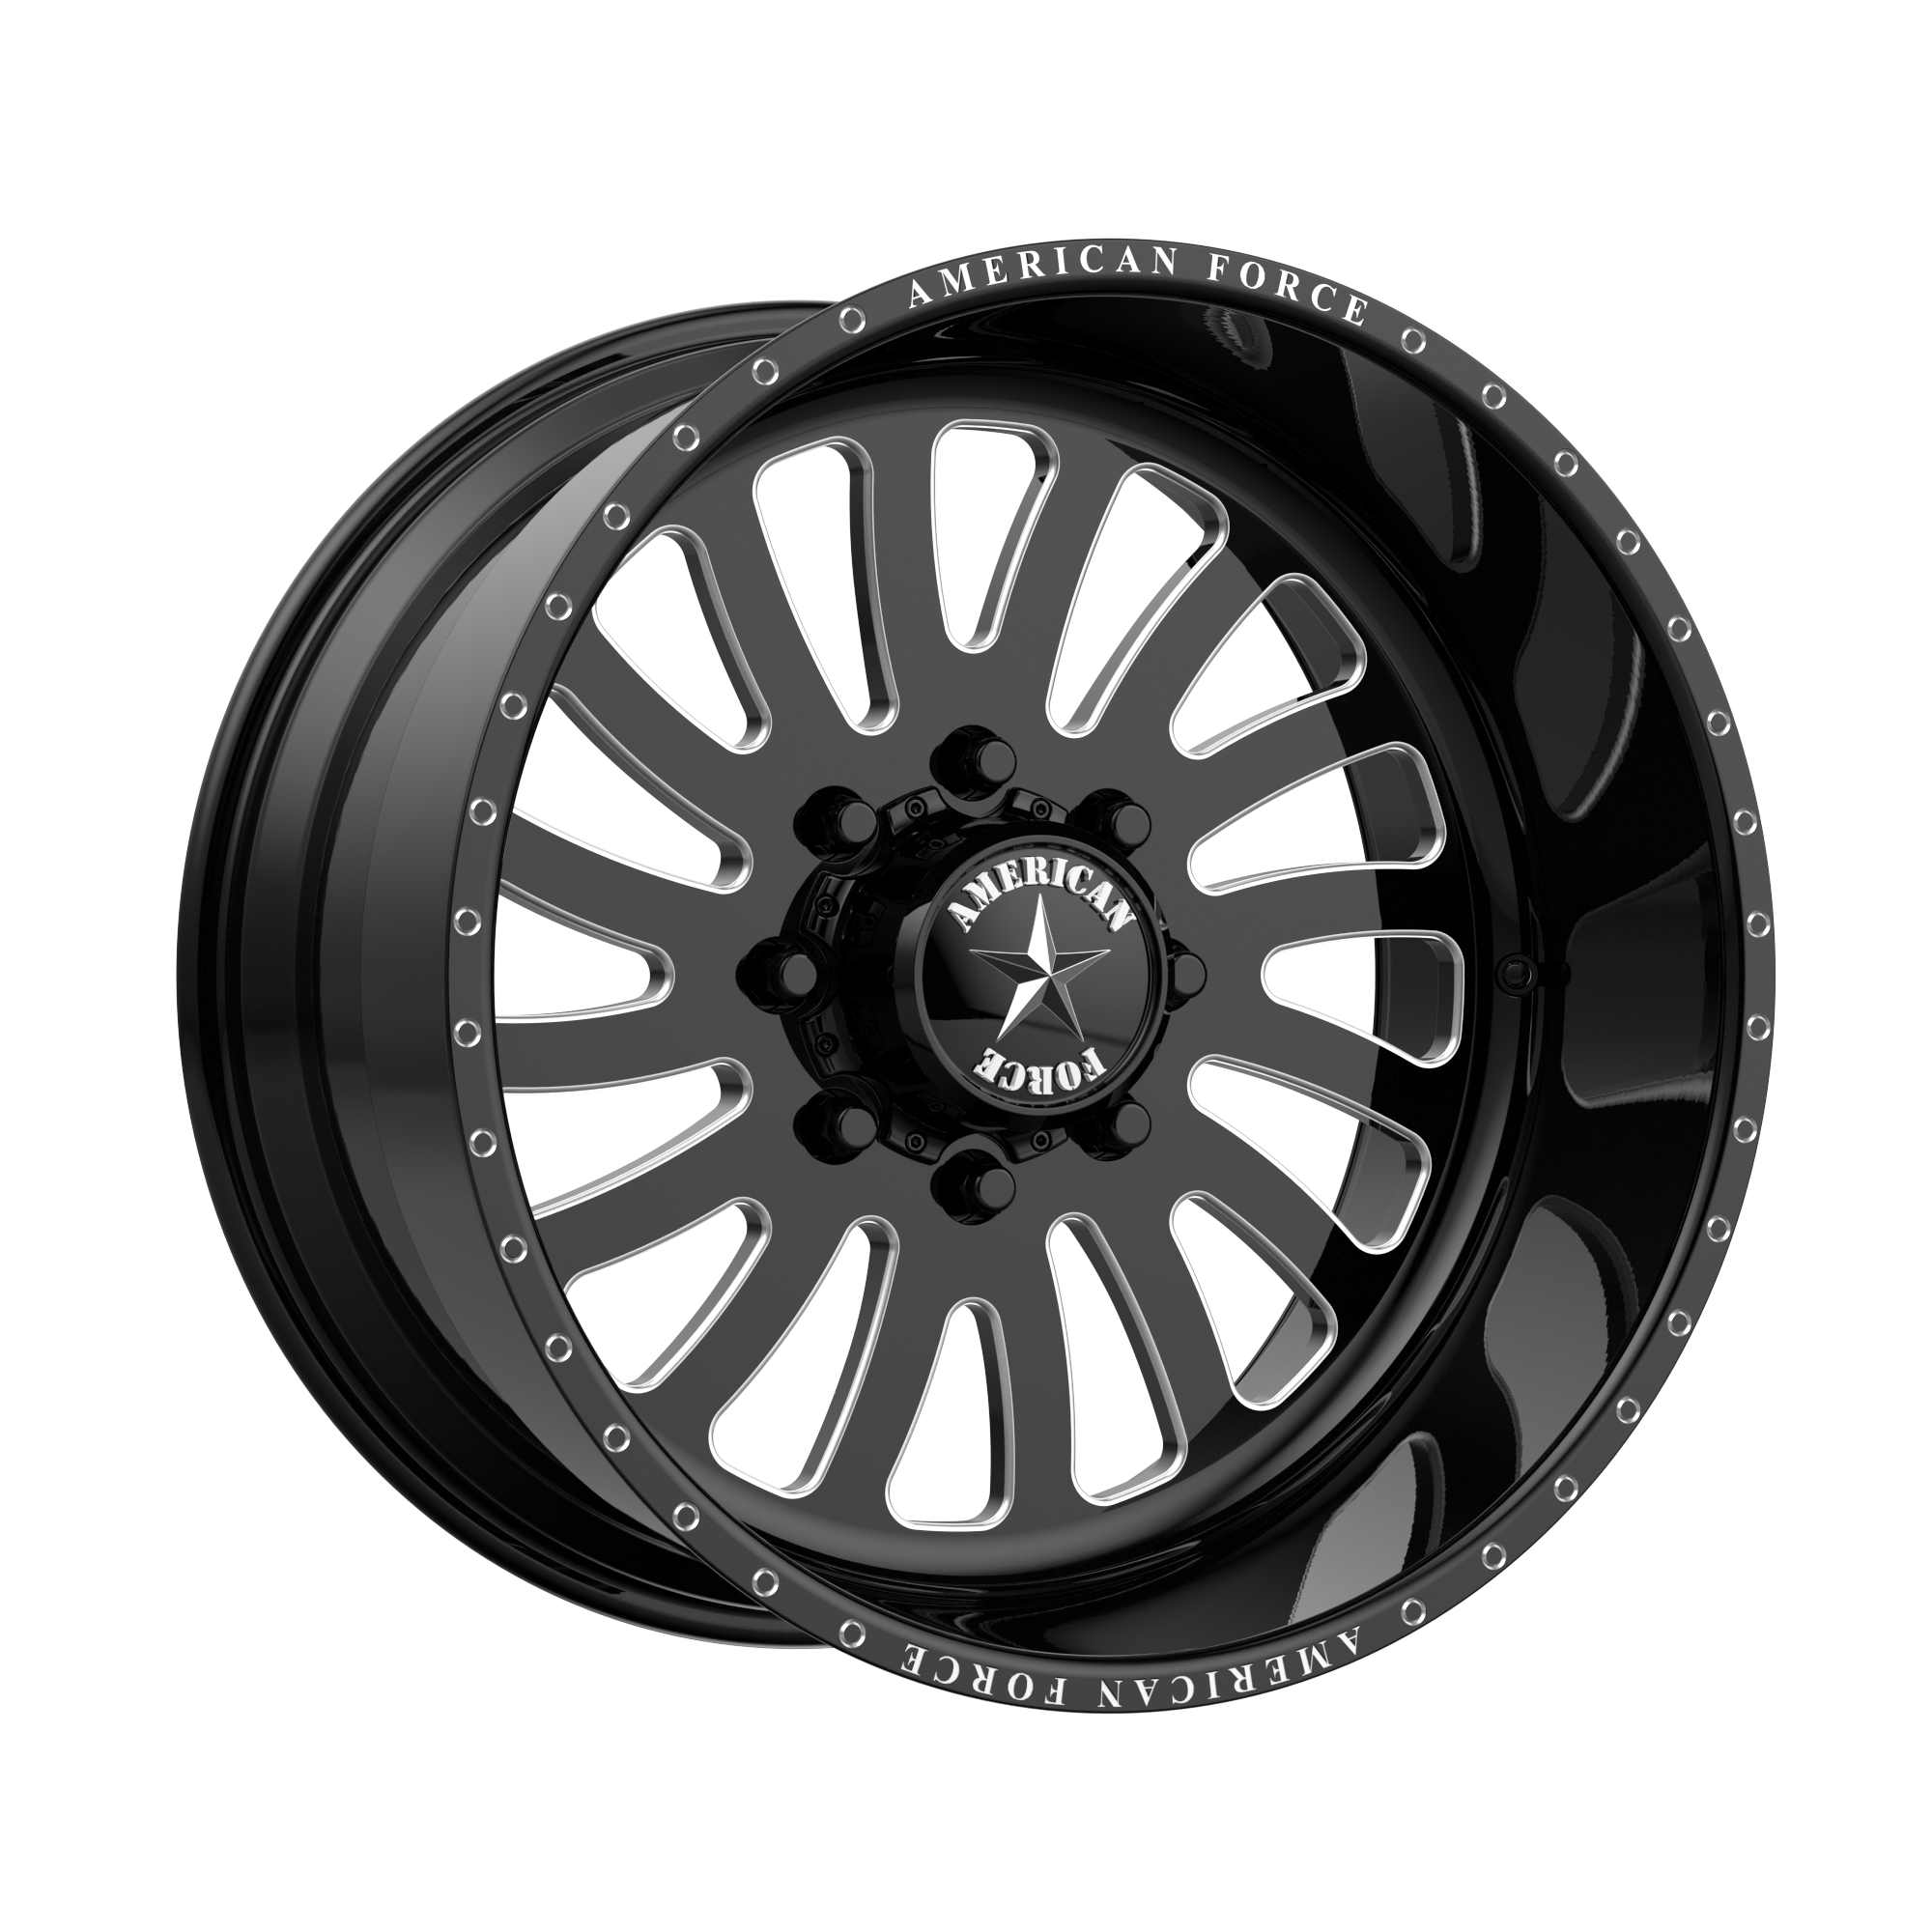 OCTANE SS 22x16 8x170.00 GLOSS BLACK MACHINED (-101 mm) - Tires and Engine Performance